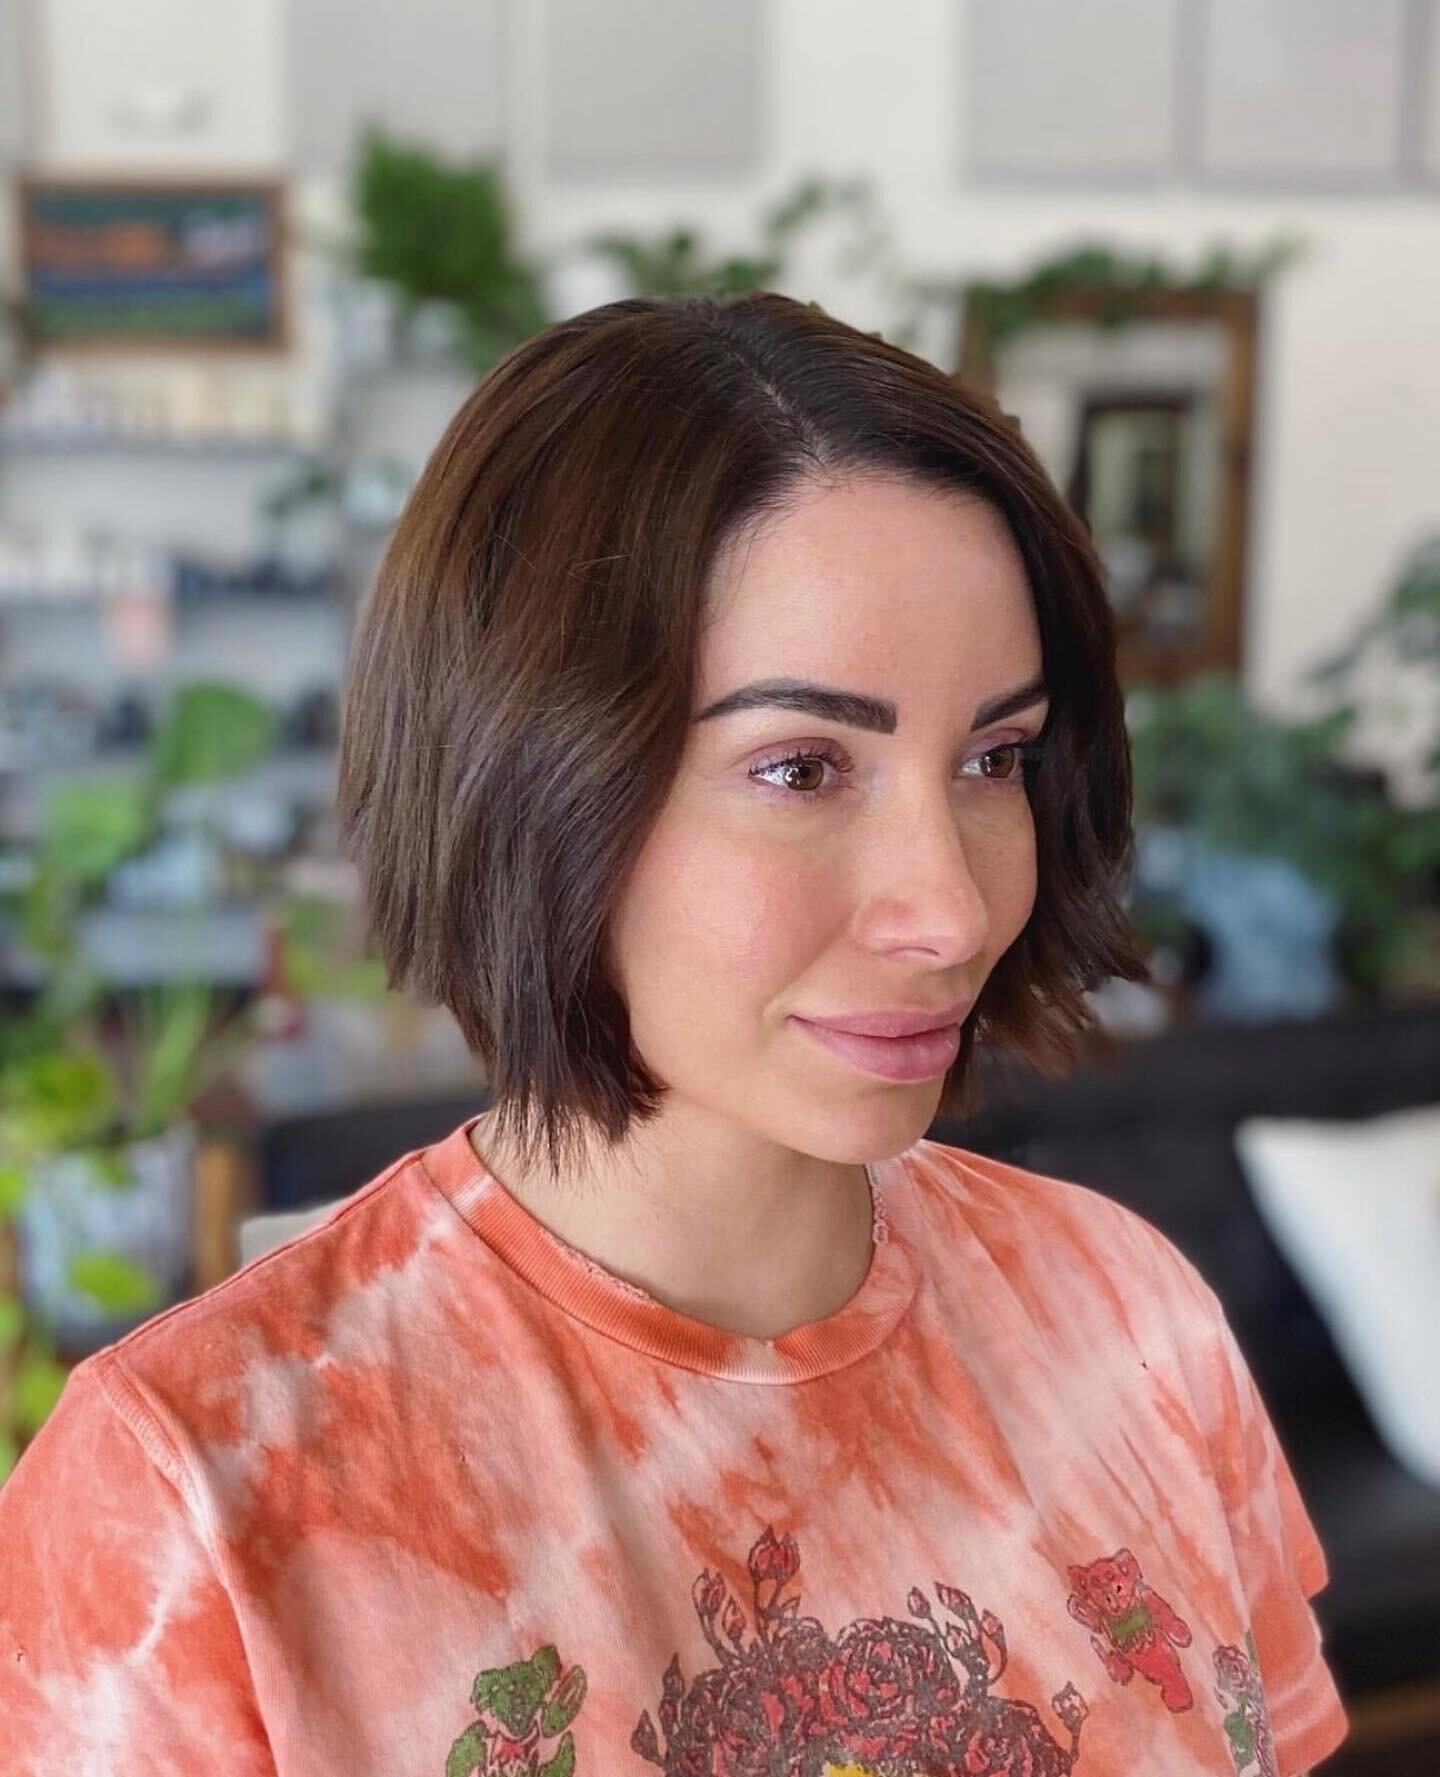 Amazing hair cutting skills by @lindsey_mintsalonlodi 🫶🏻 #getminted link in bio to book 
▪️
▪️
#mintsalon #mintsalonlodi #lodica #bobhaircut #haircut #precision #haircutter #hairhandcrafted #hairstylist #hairtrends #2024trends #frenchbob #kittycut 